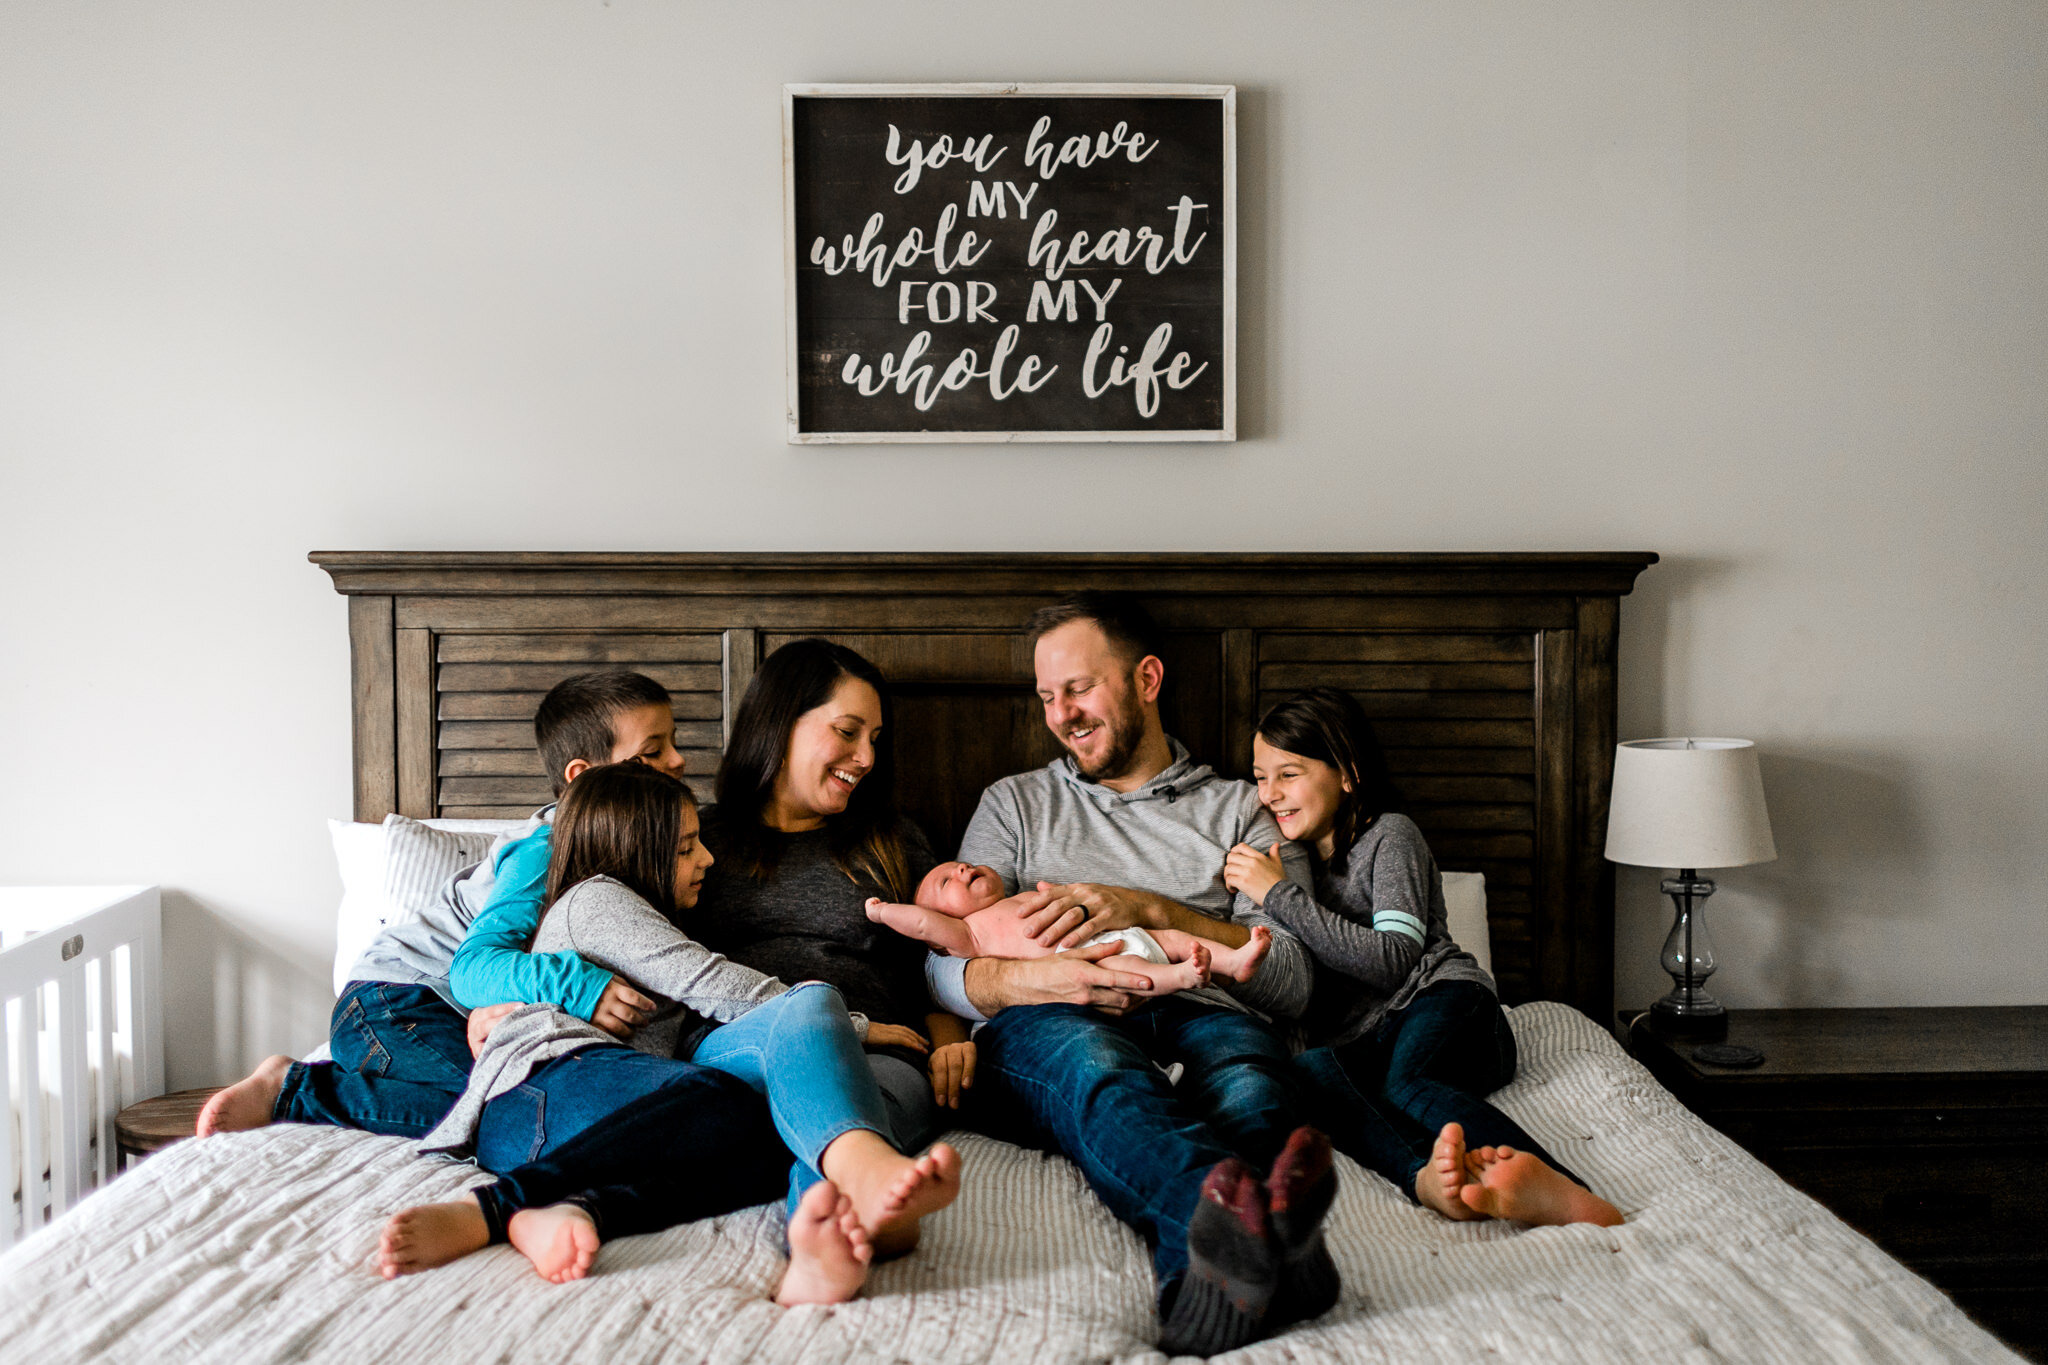 Raleigh Family Photographer | By G. Lin Photography | Lifestyle newborn session at home with family sitting together on bed